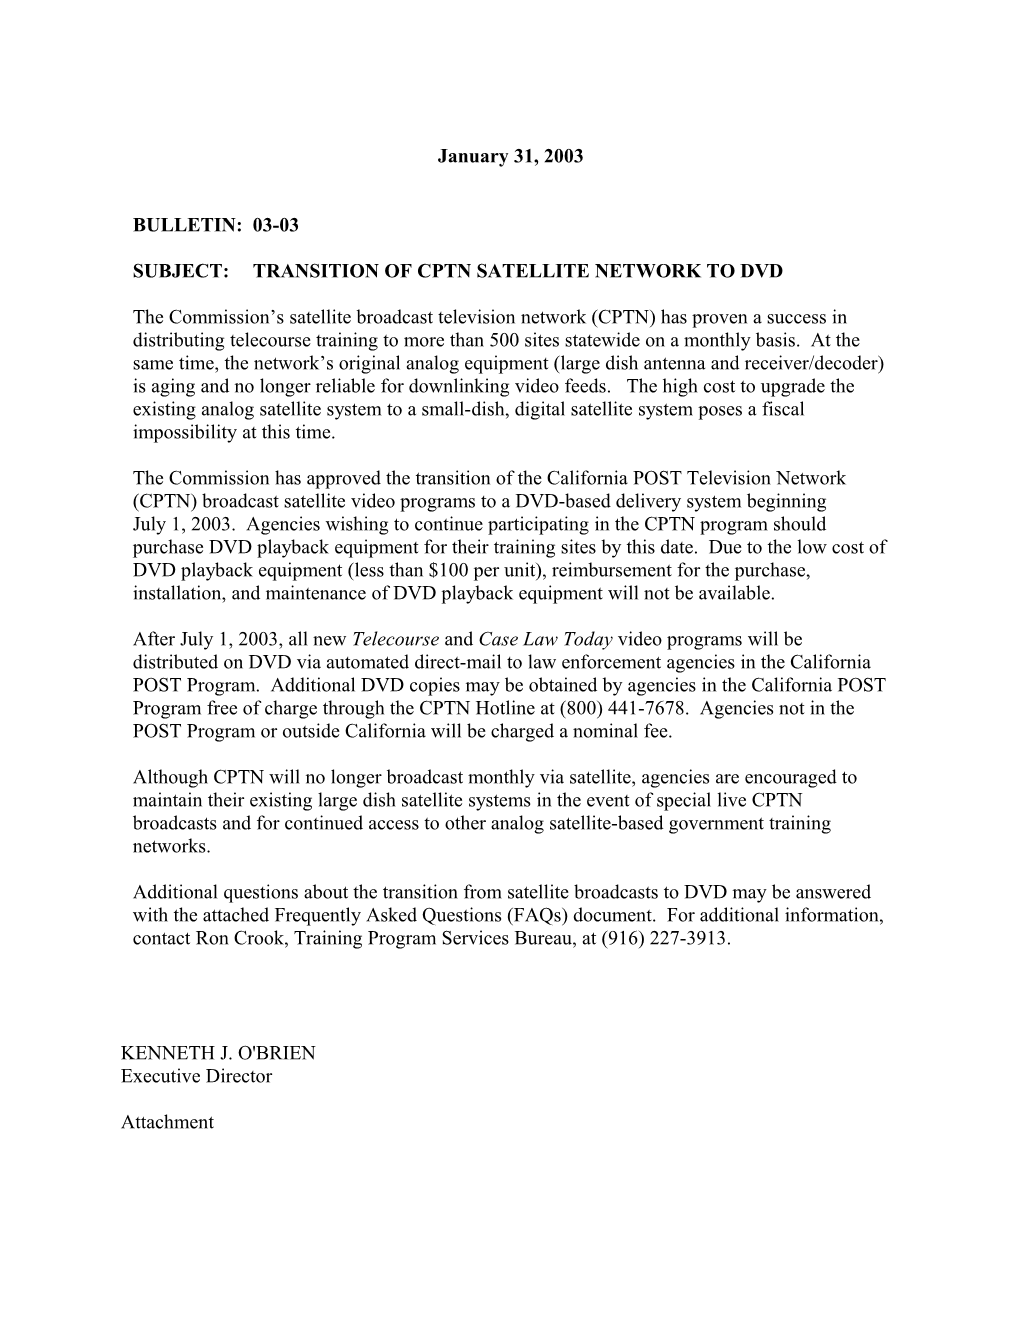 Subject:Transition of Cptn Satellite Network to Dvd